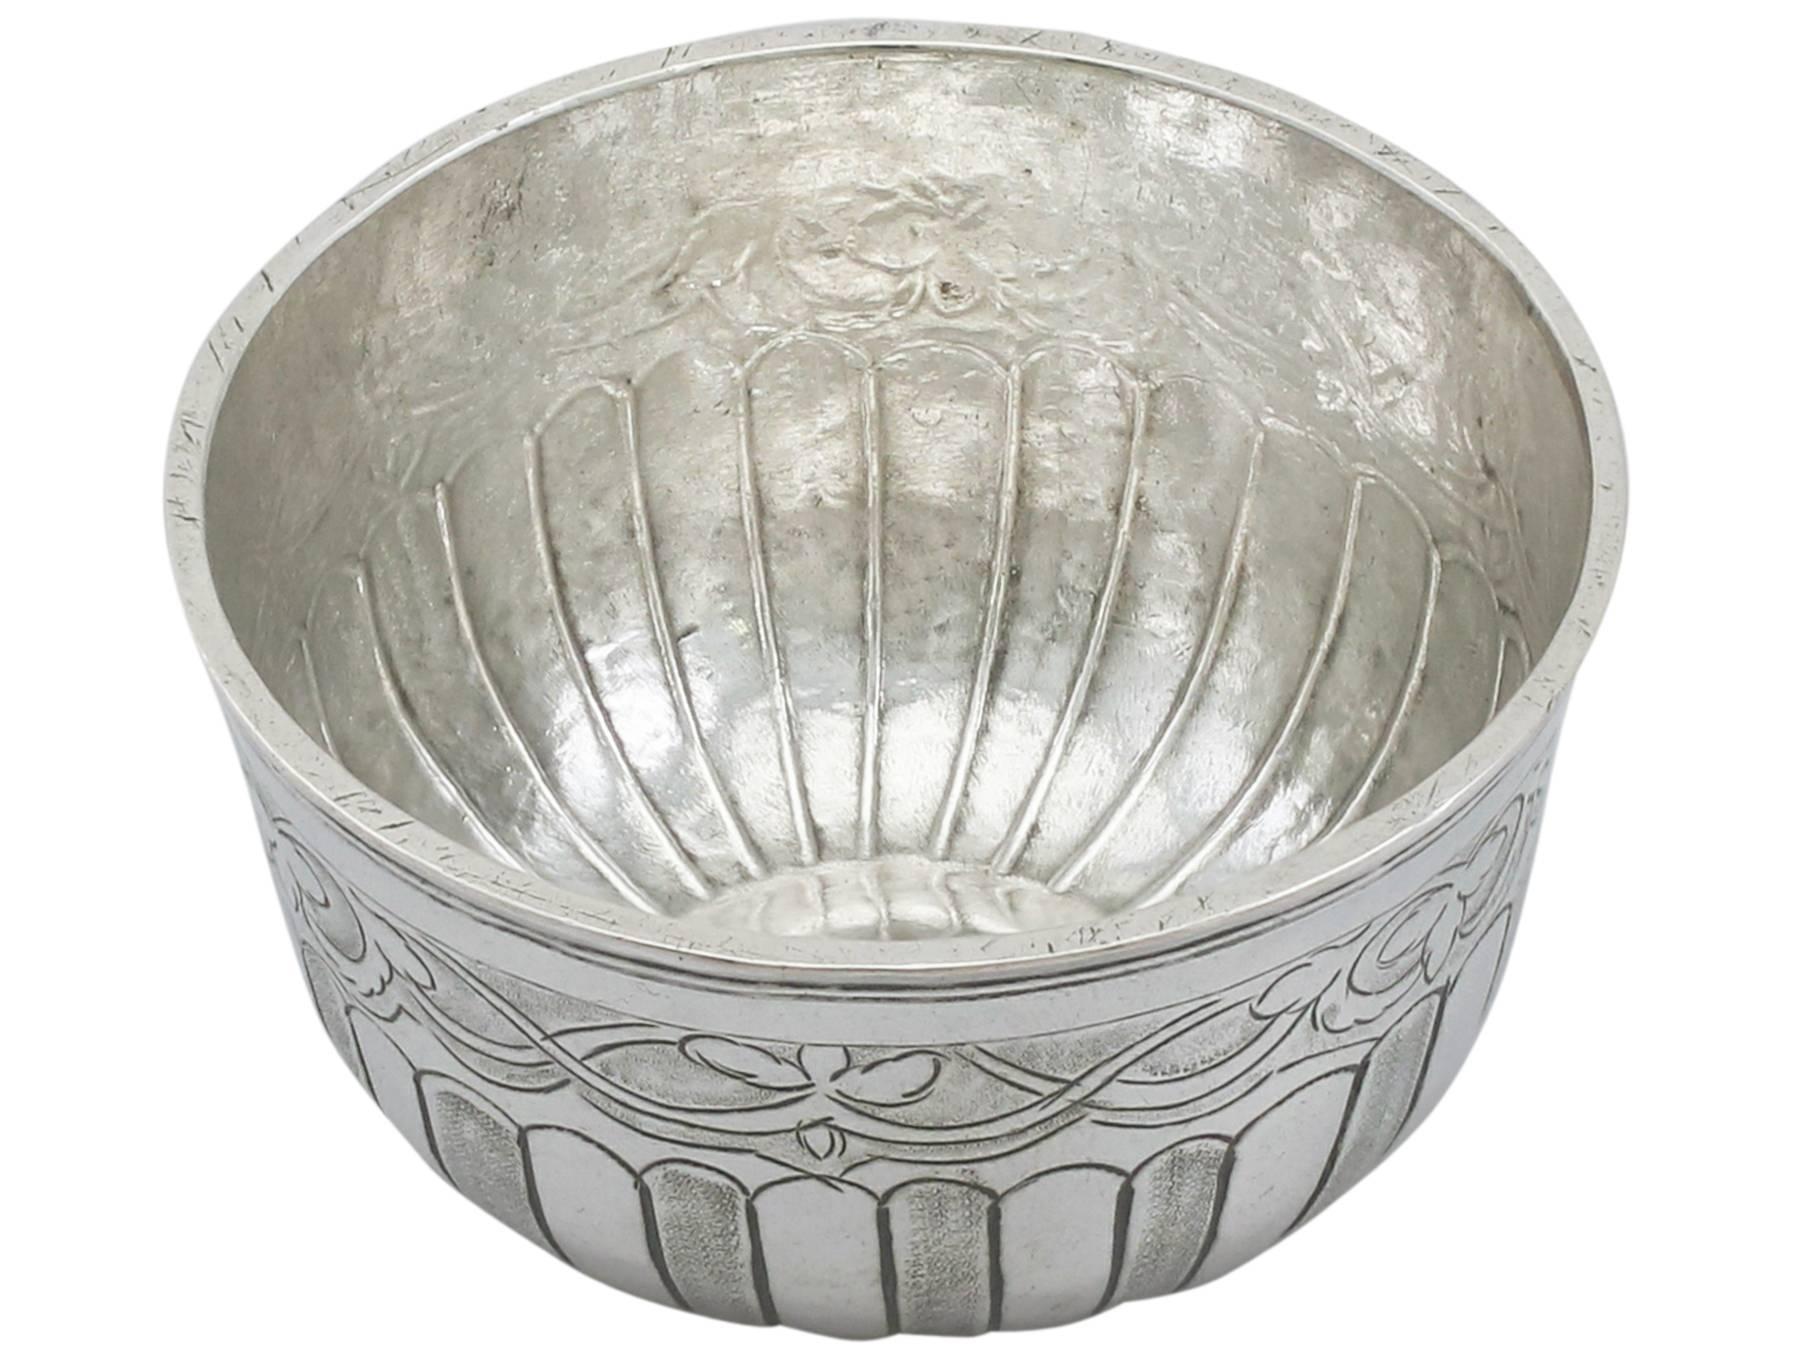 A fine and impressive antique Russian silver drinking bowl; an addition to our range of wine and drinks related silverware collection

This fine antique Russian silver drinking bowl has a circular rounded form.

The upper portion of this